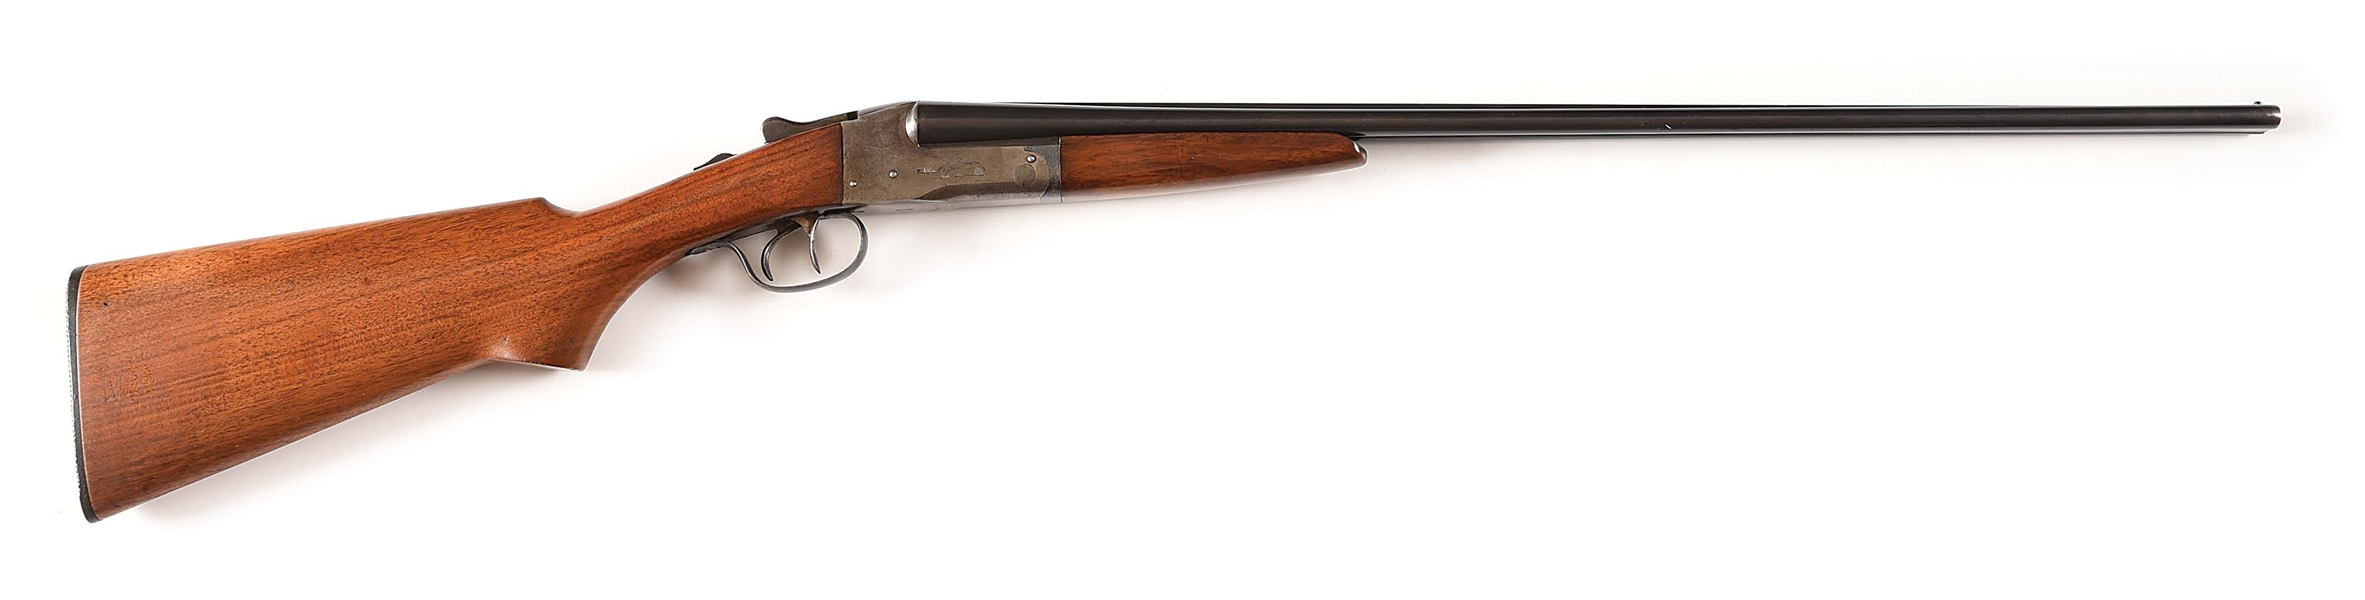 (C) ITHACA LEFEVER ARMS SIDE BY SIDE SHOTGUN